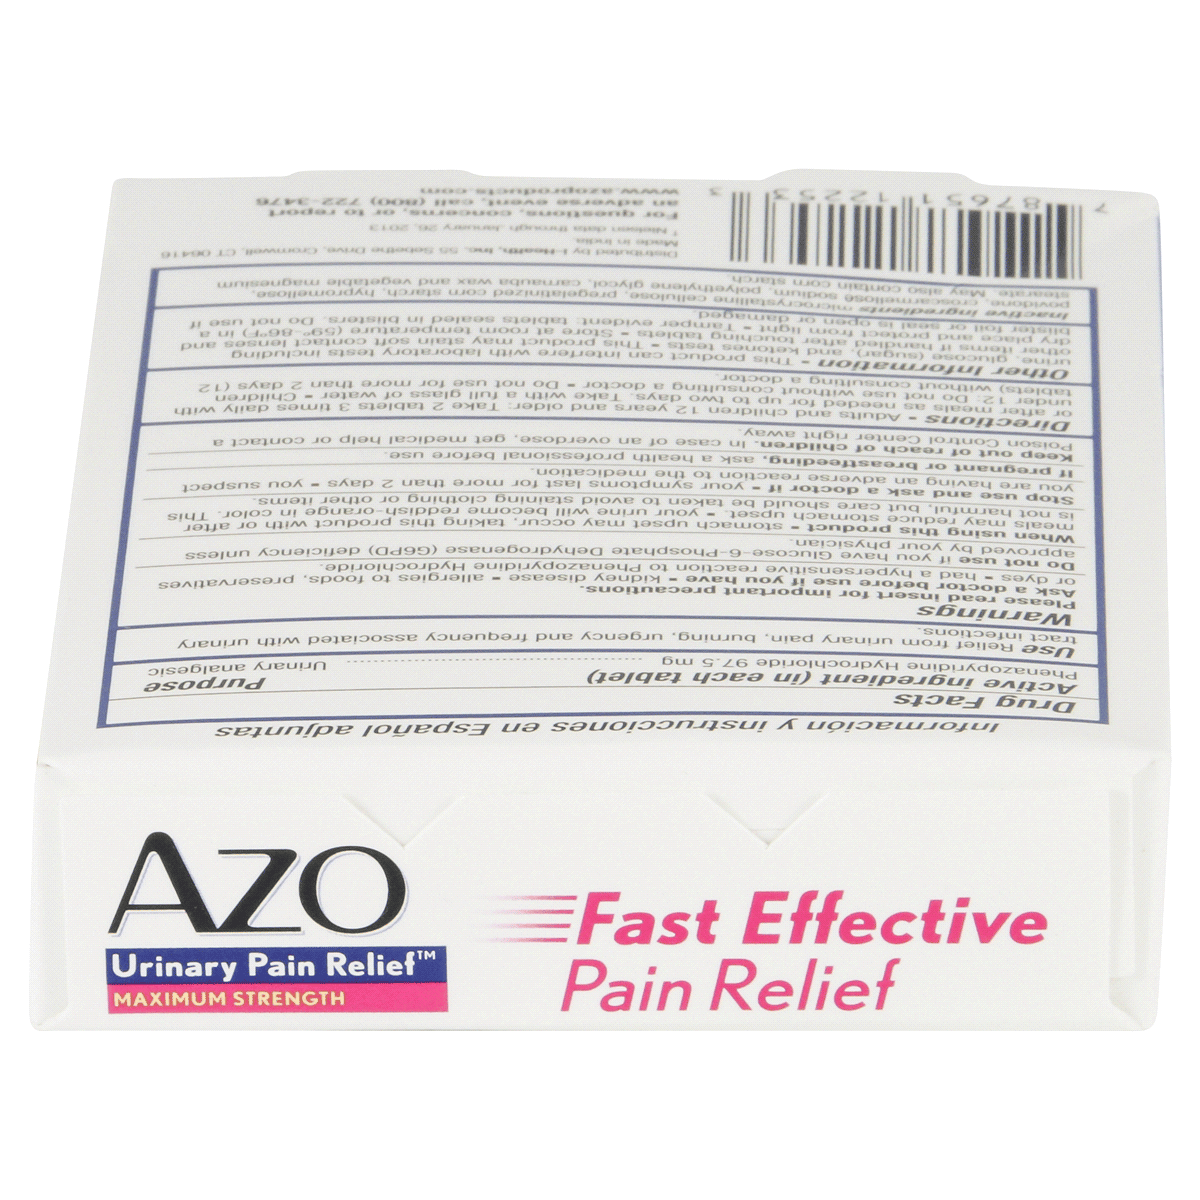 AZO Urinary Pain Relief Maximum Strength Tablets 12 ct